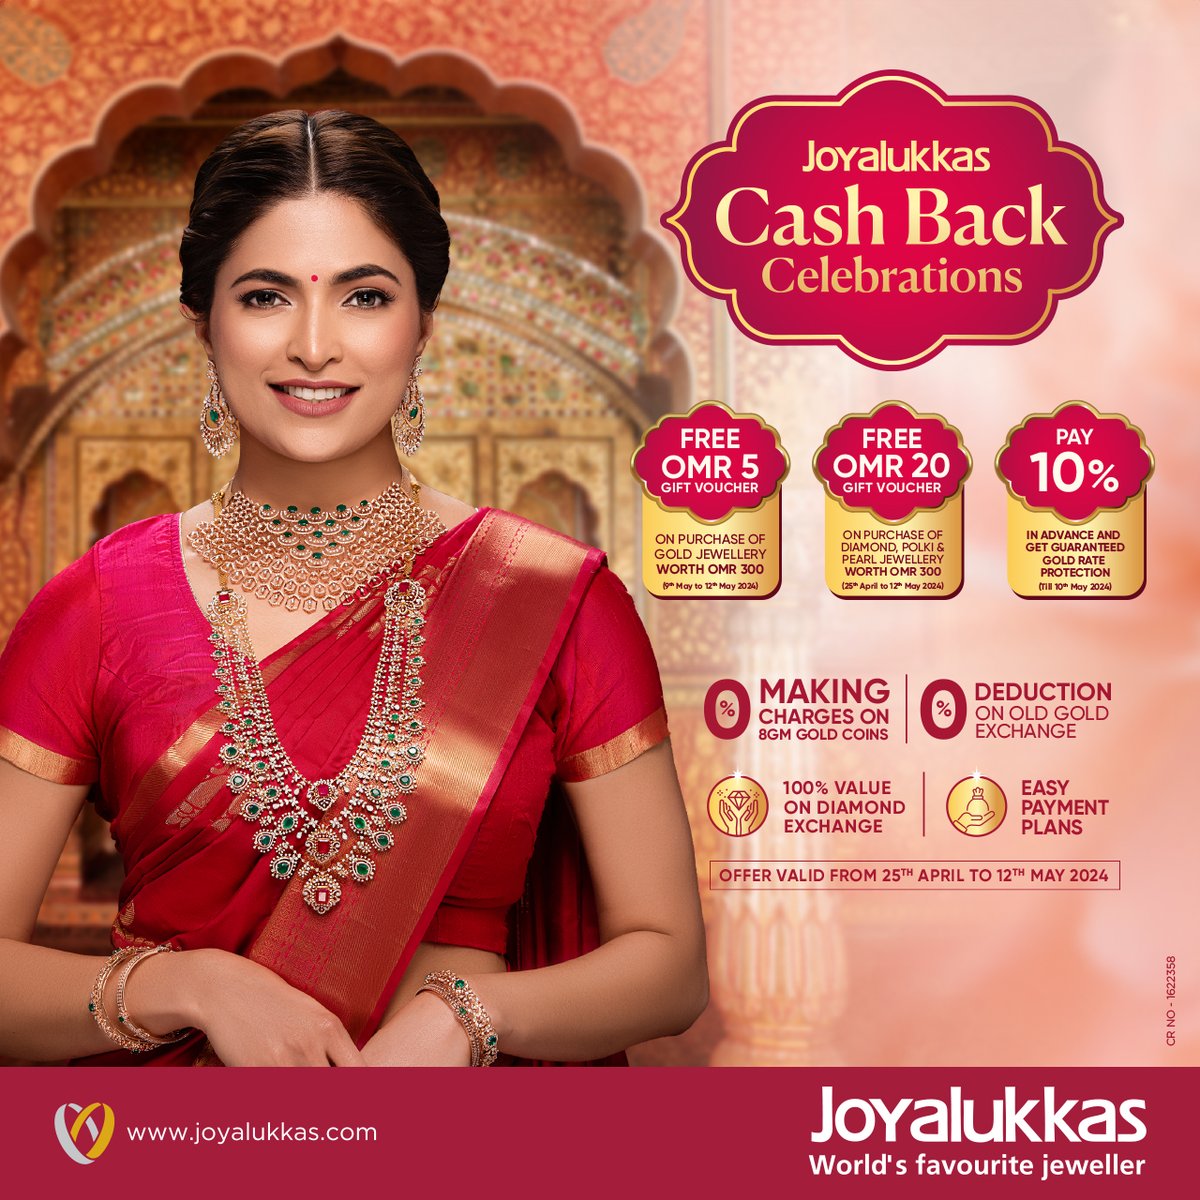 Sponsored Content :

Joyalukkas Cashback Celebrations is here!

Buy jewellery worth OMR 300 and get free gift vouchers. Pay 10% advance and get guaranteed gold rate protection. Buy 8 gm gold coins at 0% making charges. Also enjoy 0% deduction on old gold exchange. 

To know more…